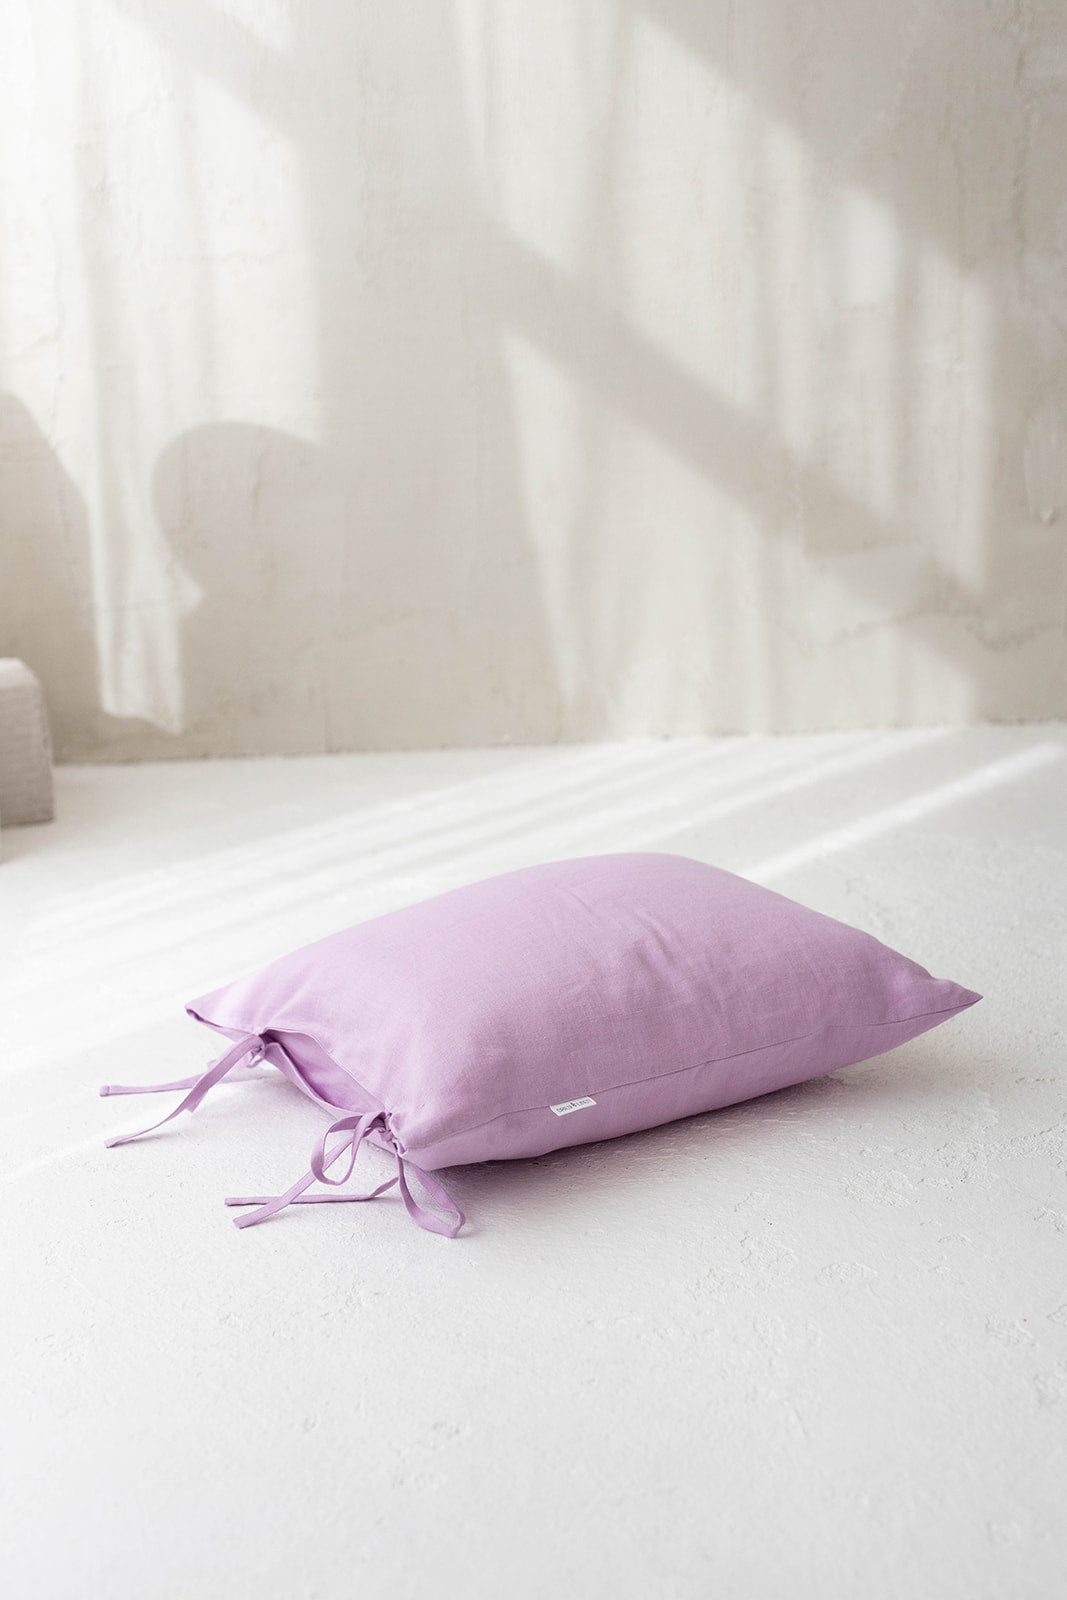 Linen Pillowcase With Ties In Lavender Color 1 - Daily Linen